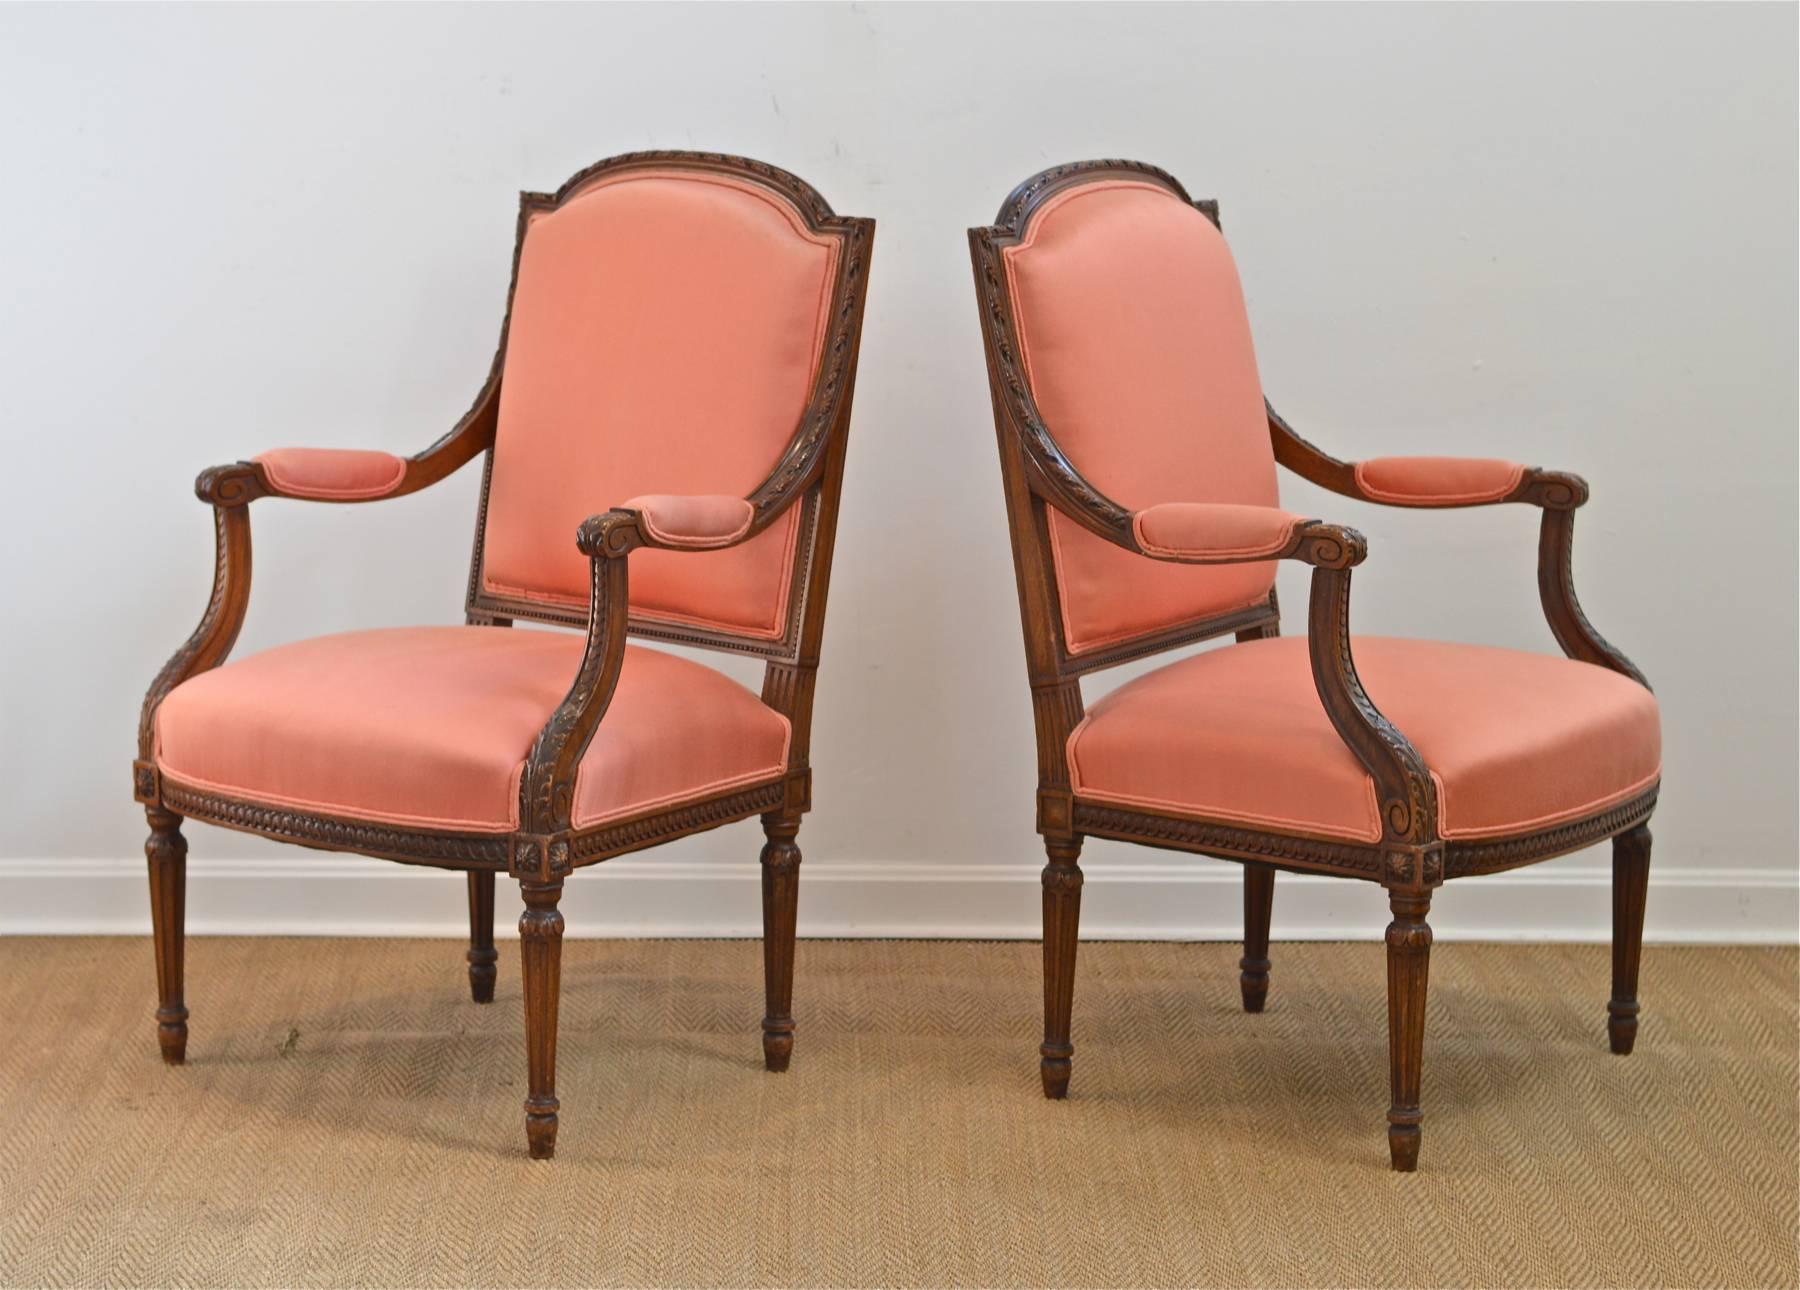 Fantastic pair of Louis XVI style fauteuils in fruitwood and coral fabric. Classic style. Two pairs available.